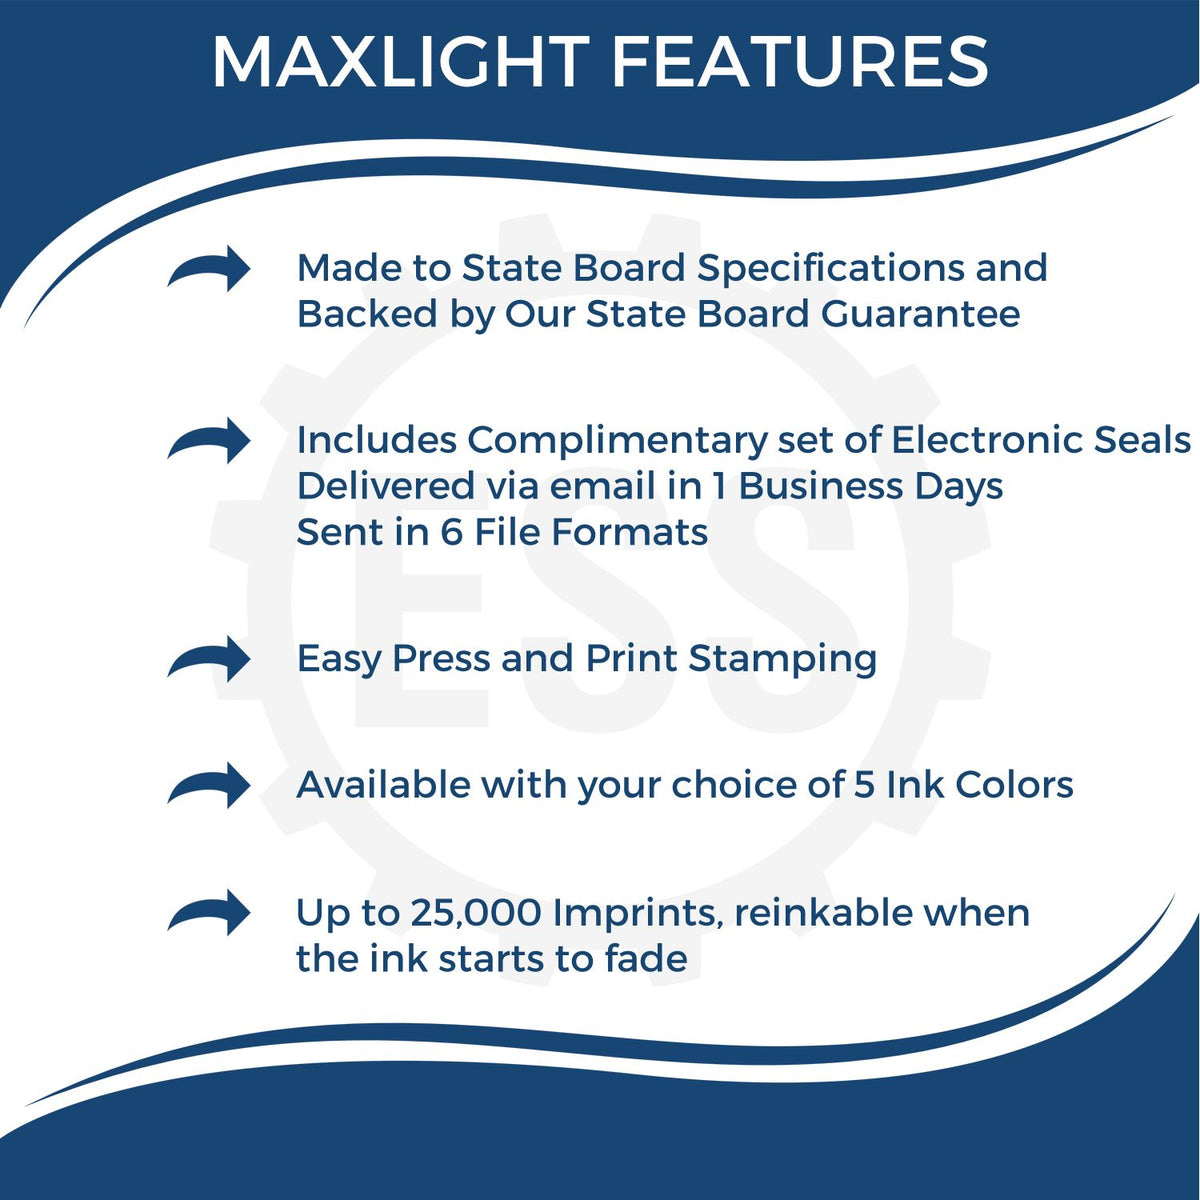 A picture of an infographic highlighting the selling points for the MaxLight Premium Pre-Inked Rhode Island Rectangular Notarial Stamp